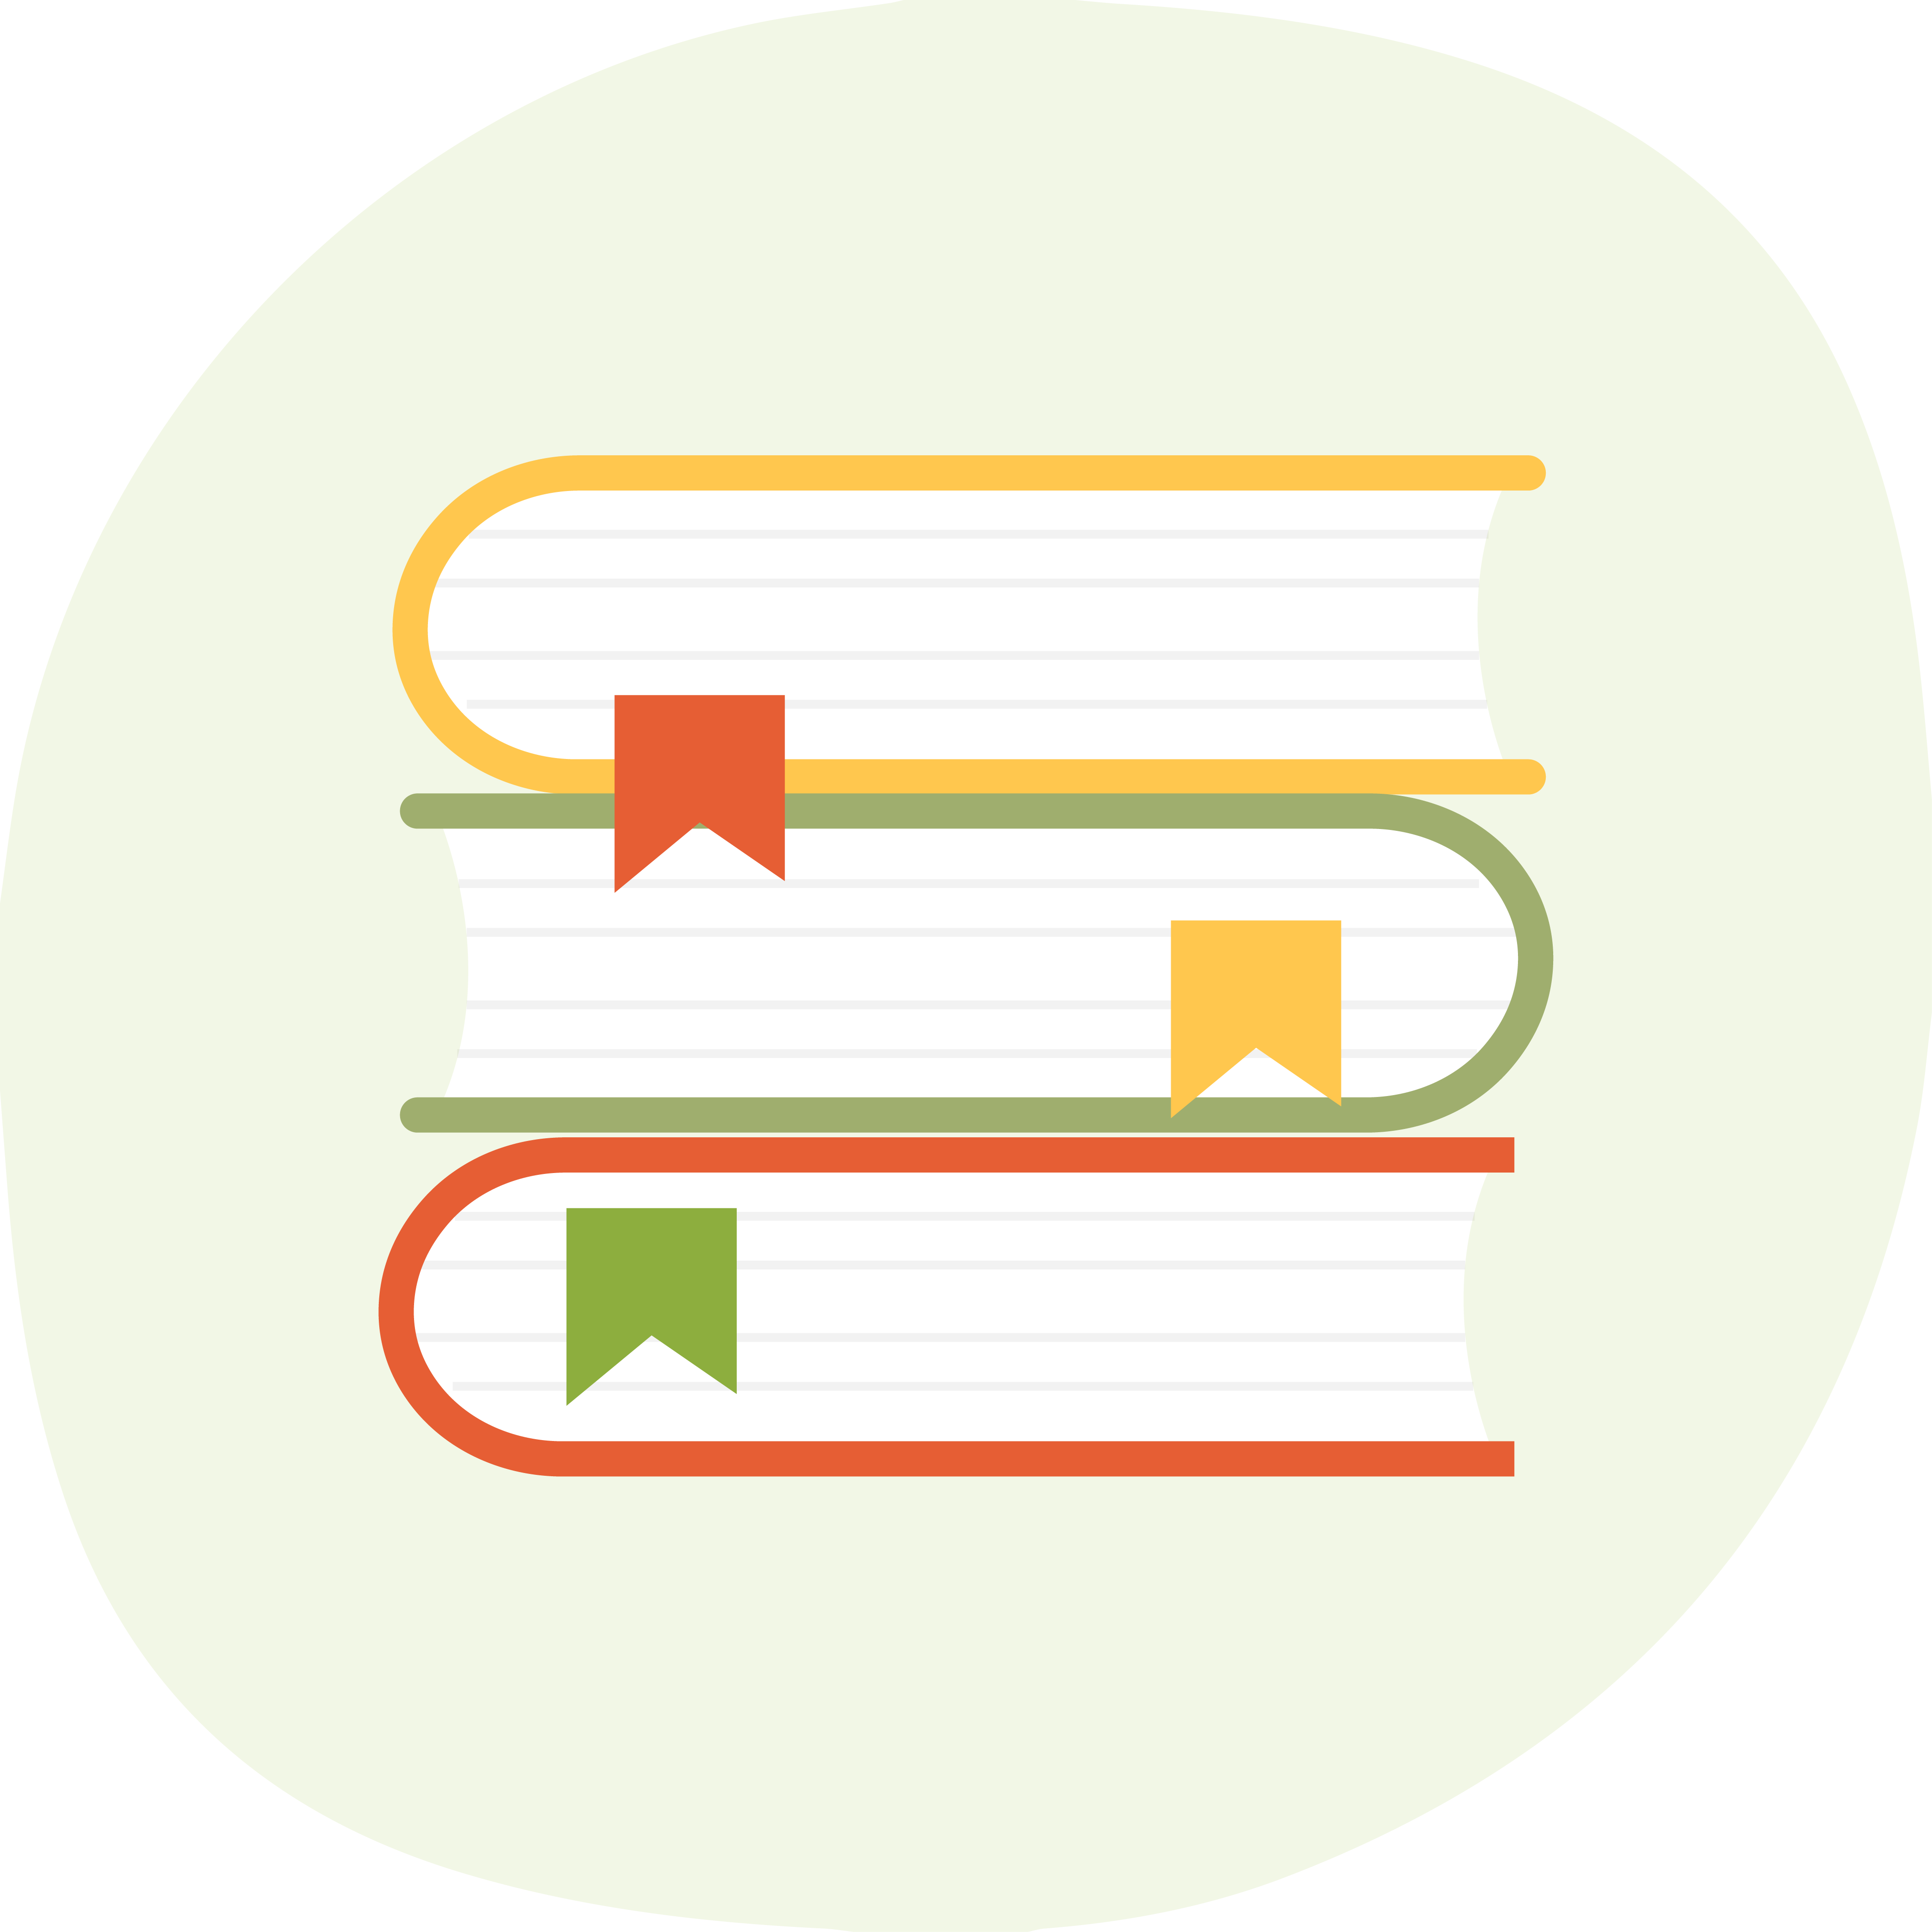 Three stacked books icon with a light green background.